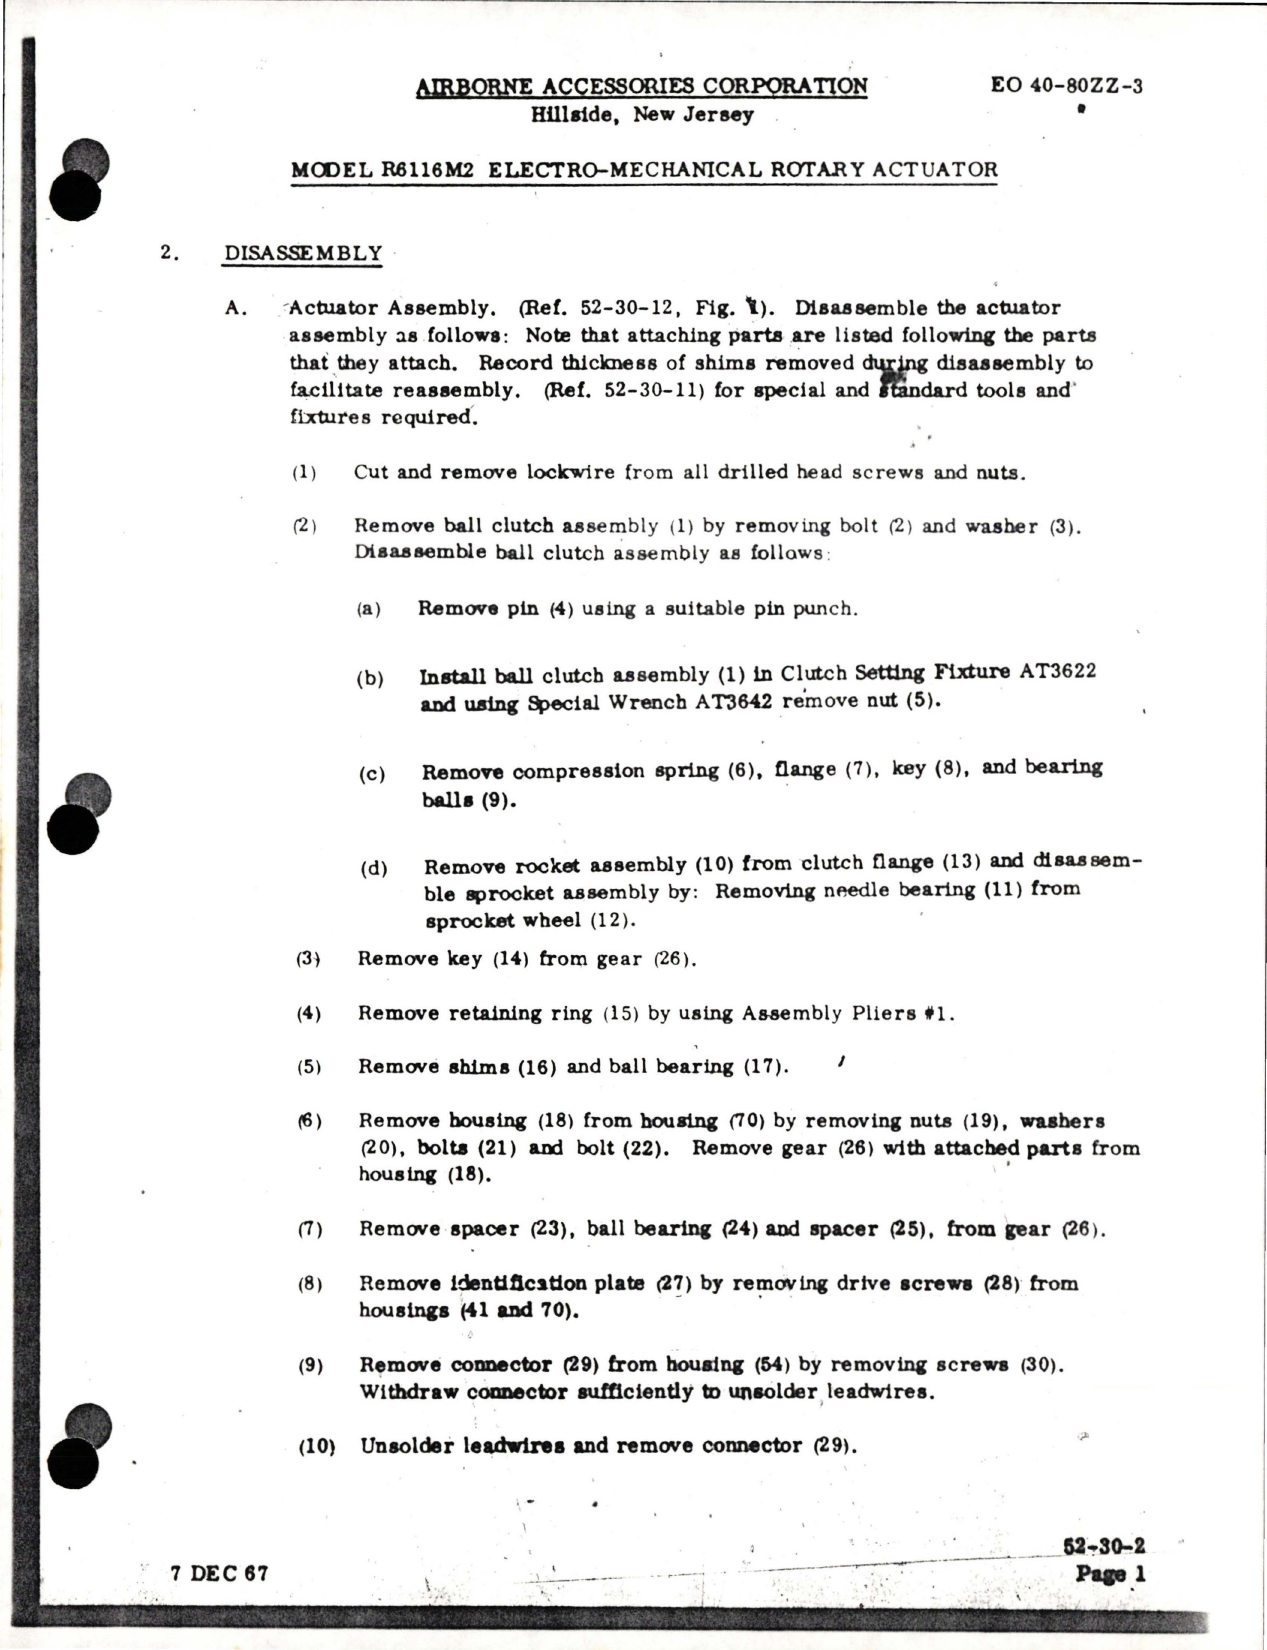 Sample page 7 from AirCorps Library document: Handbook with Parts List for Electro-Mechanical Rotary Actuator Model R6116M2 